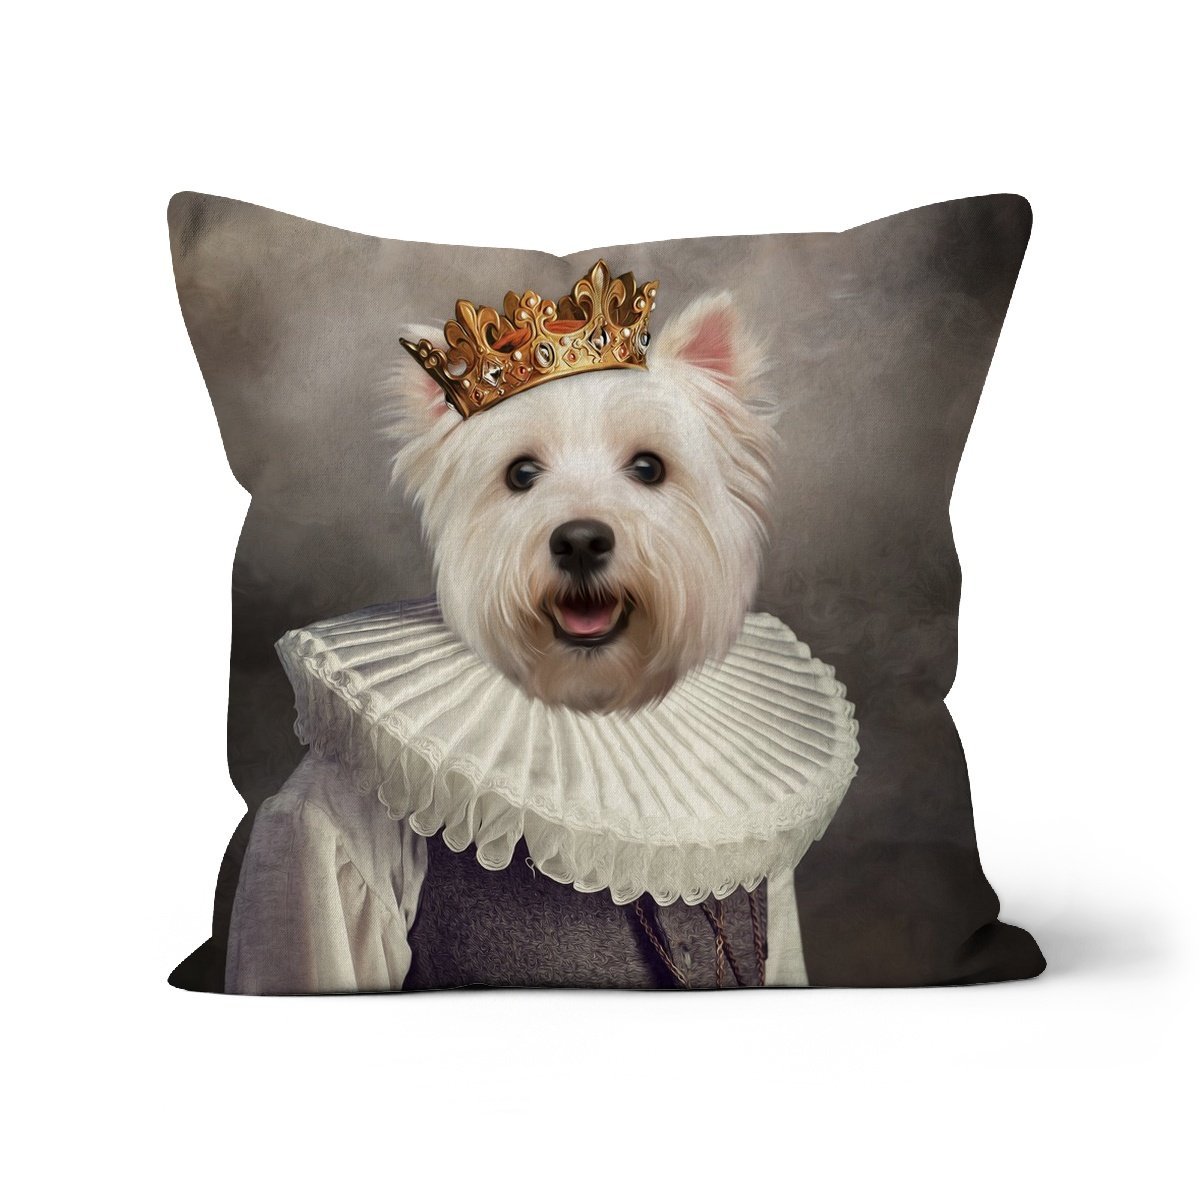 The Young Prince: Custom Pet Cushion - Paw & Glory - #pet portraits# - #dog portraits# - #pet portraits uk#paw & glory, custom pet portrait pillow,personalised cat pillow, dog shaped pillows, custom pillow cover, pillows with dogs picture, my pet pillow